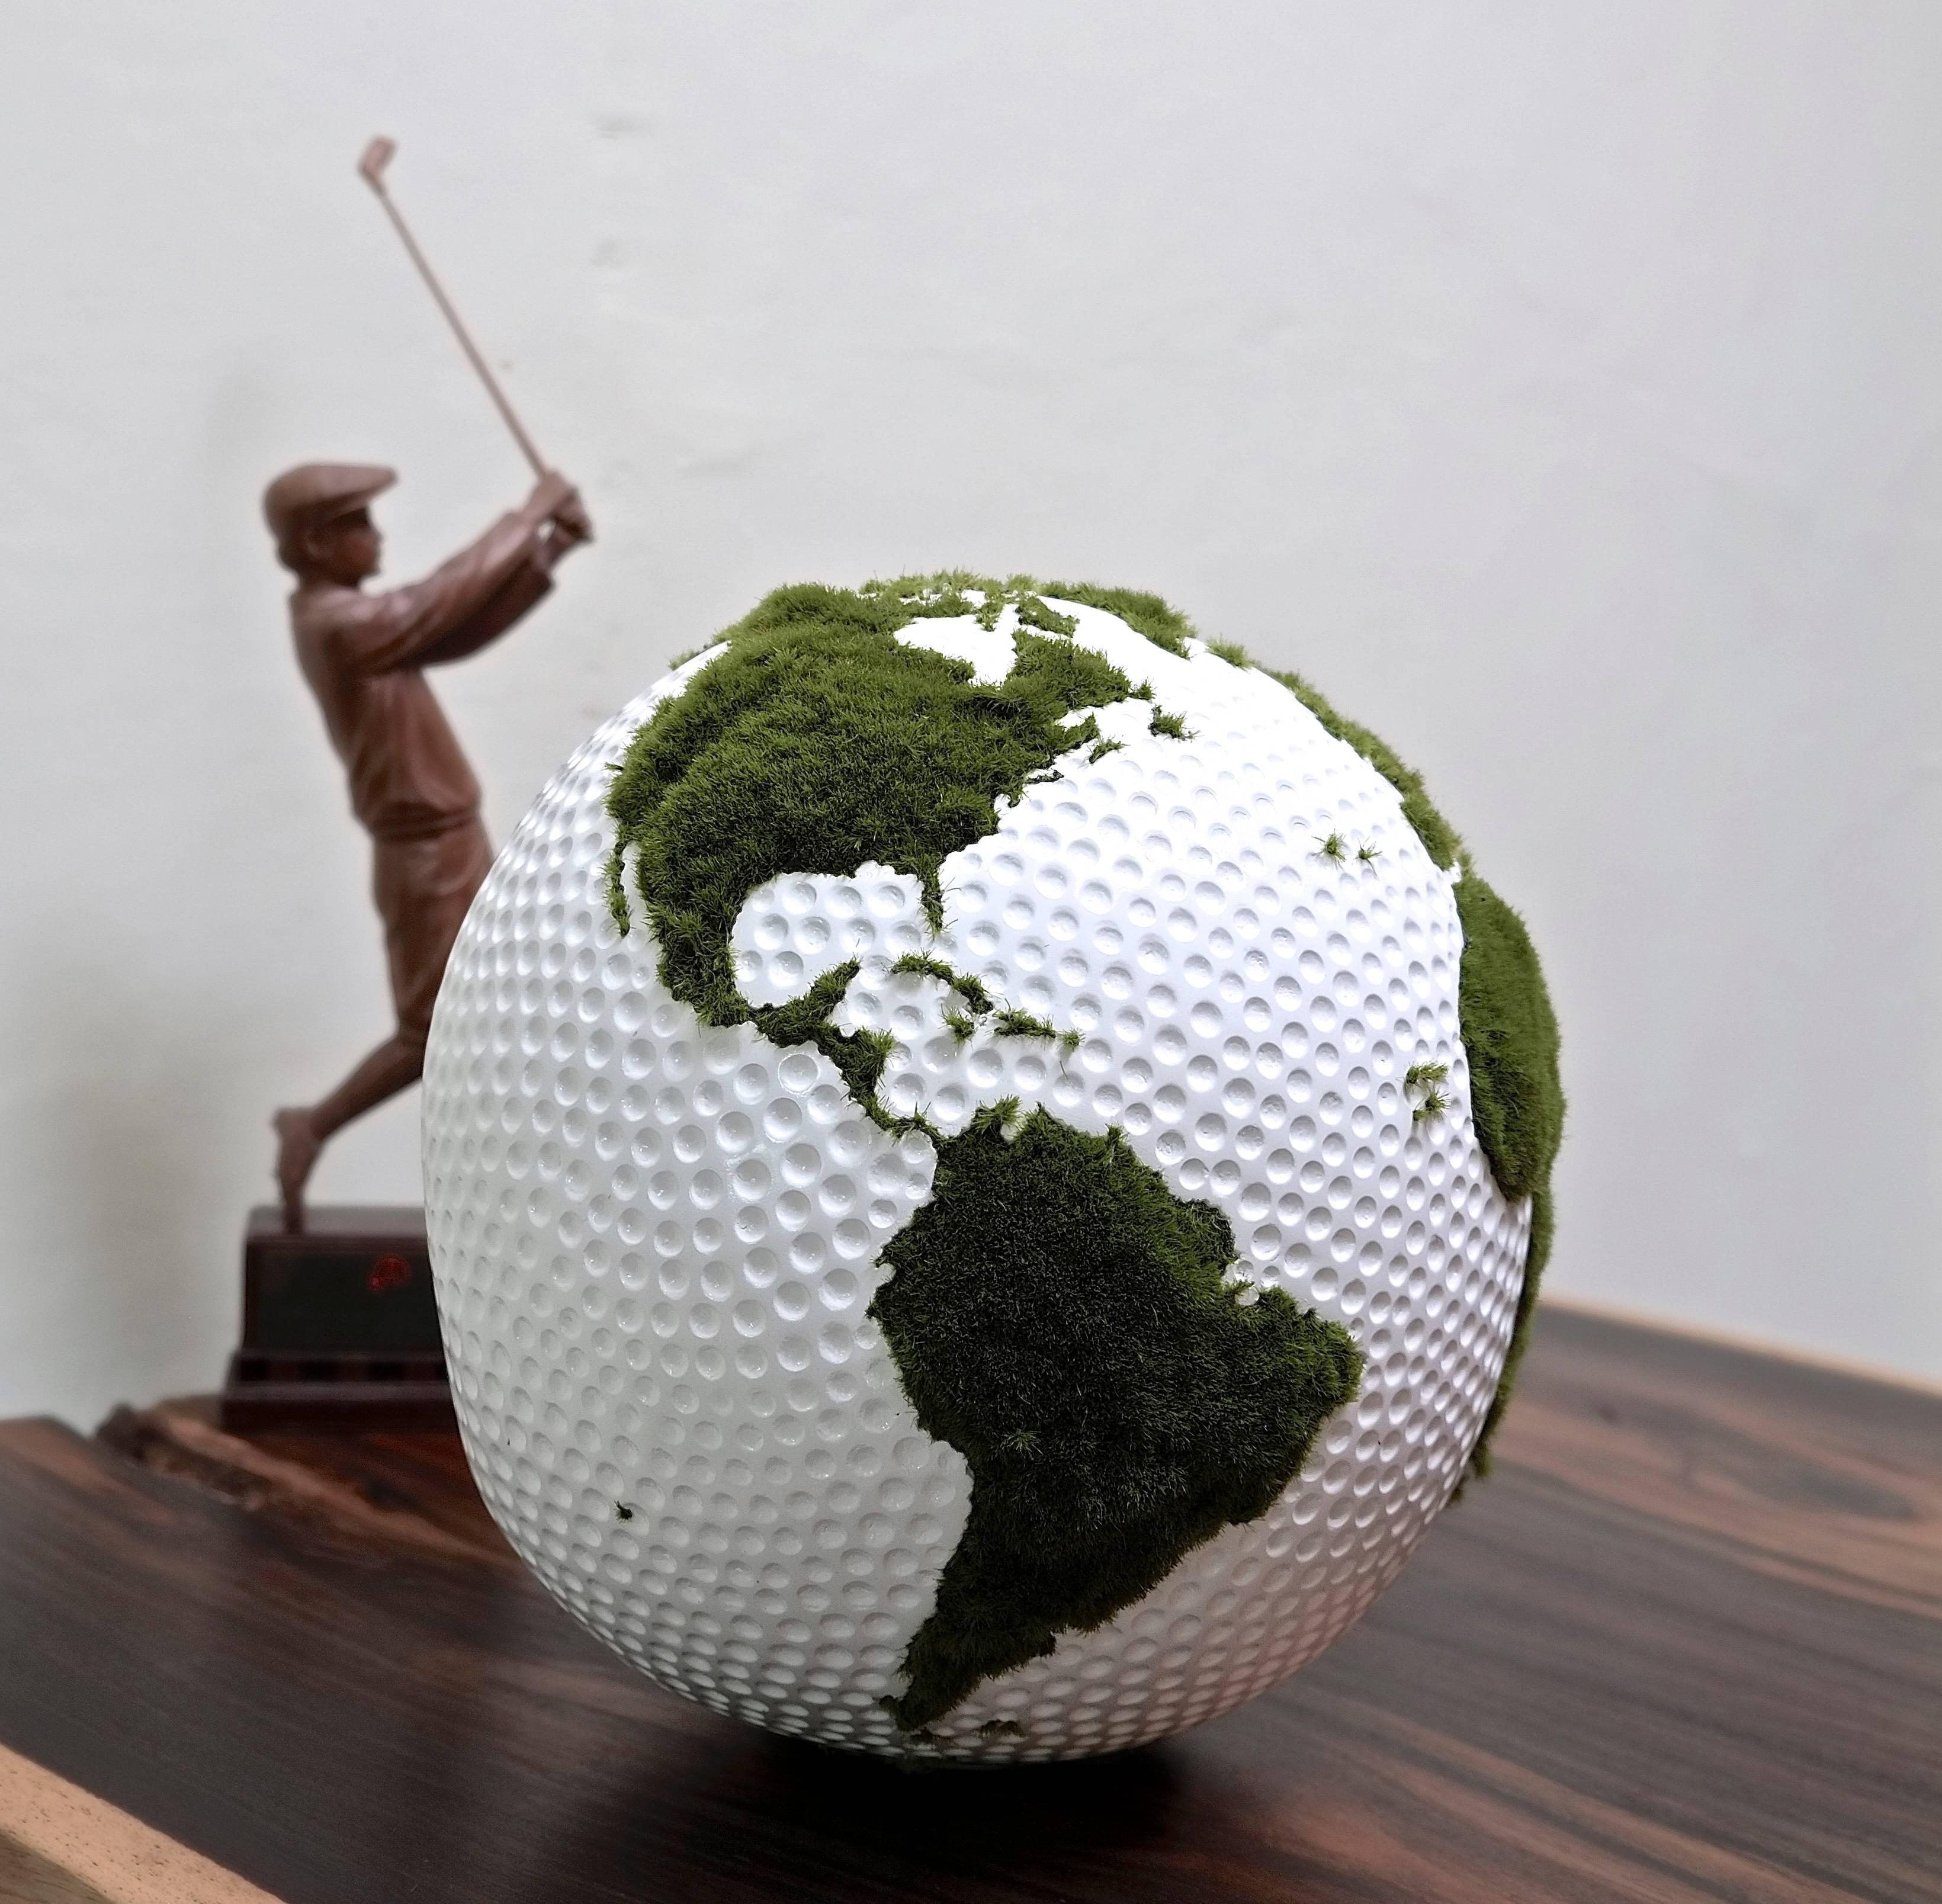 Golf globe hand-carved in a solid teak root
One of a kind
Measures: Diameter 30 cm
Turning base
Ball: Hand-carved holes / white acrylic resin
Continents: Synthetic lawn.